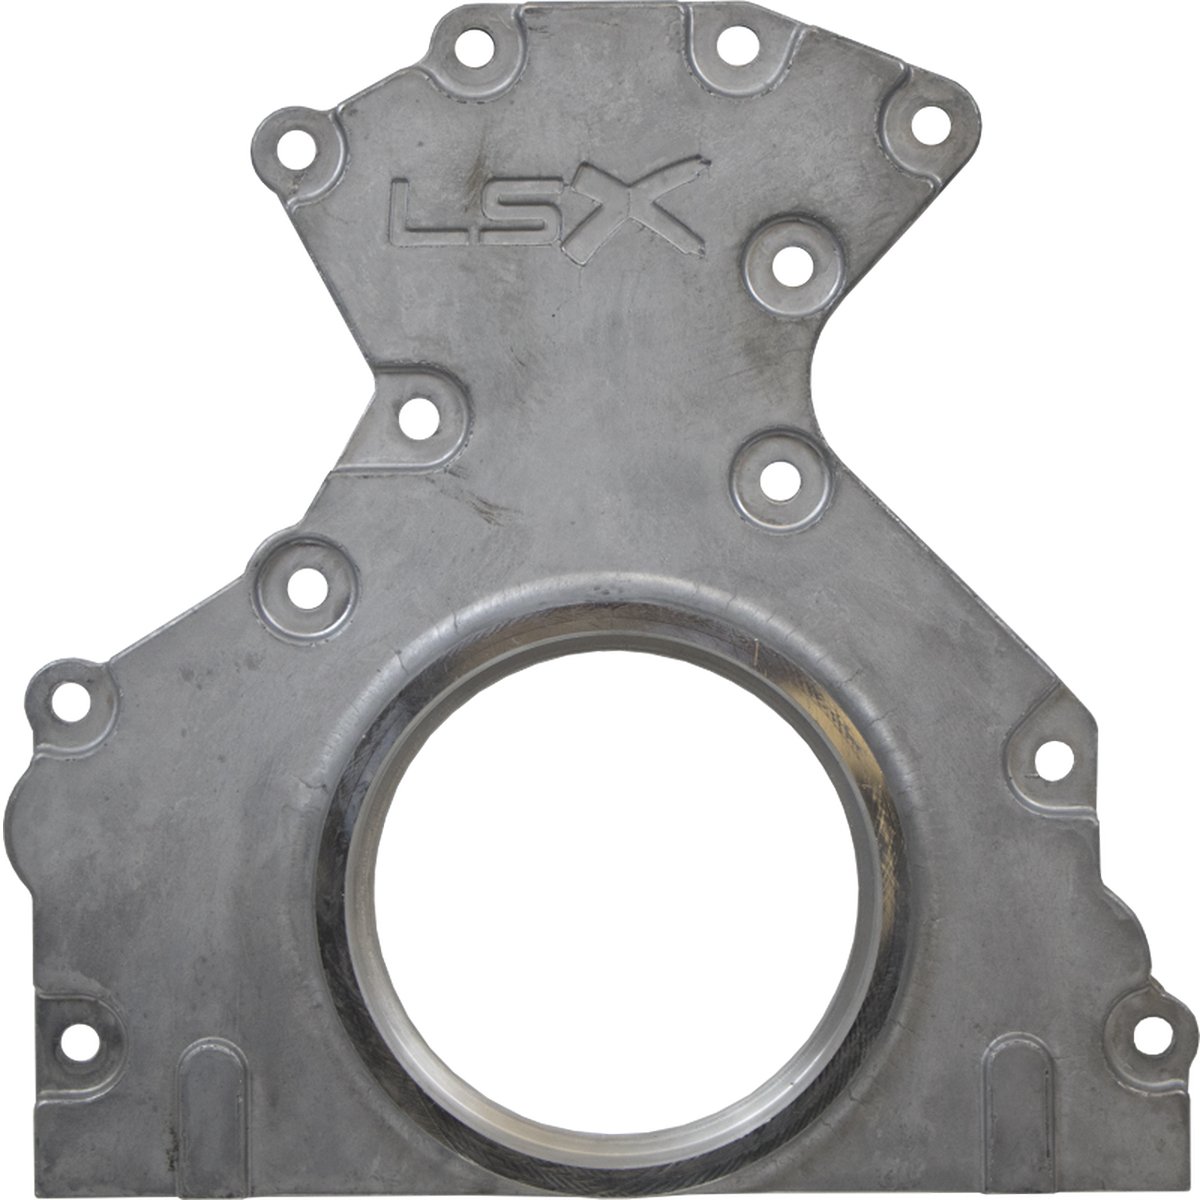 LSX Rear Block Cover, Use On LSX Blocks Only